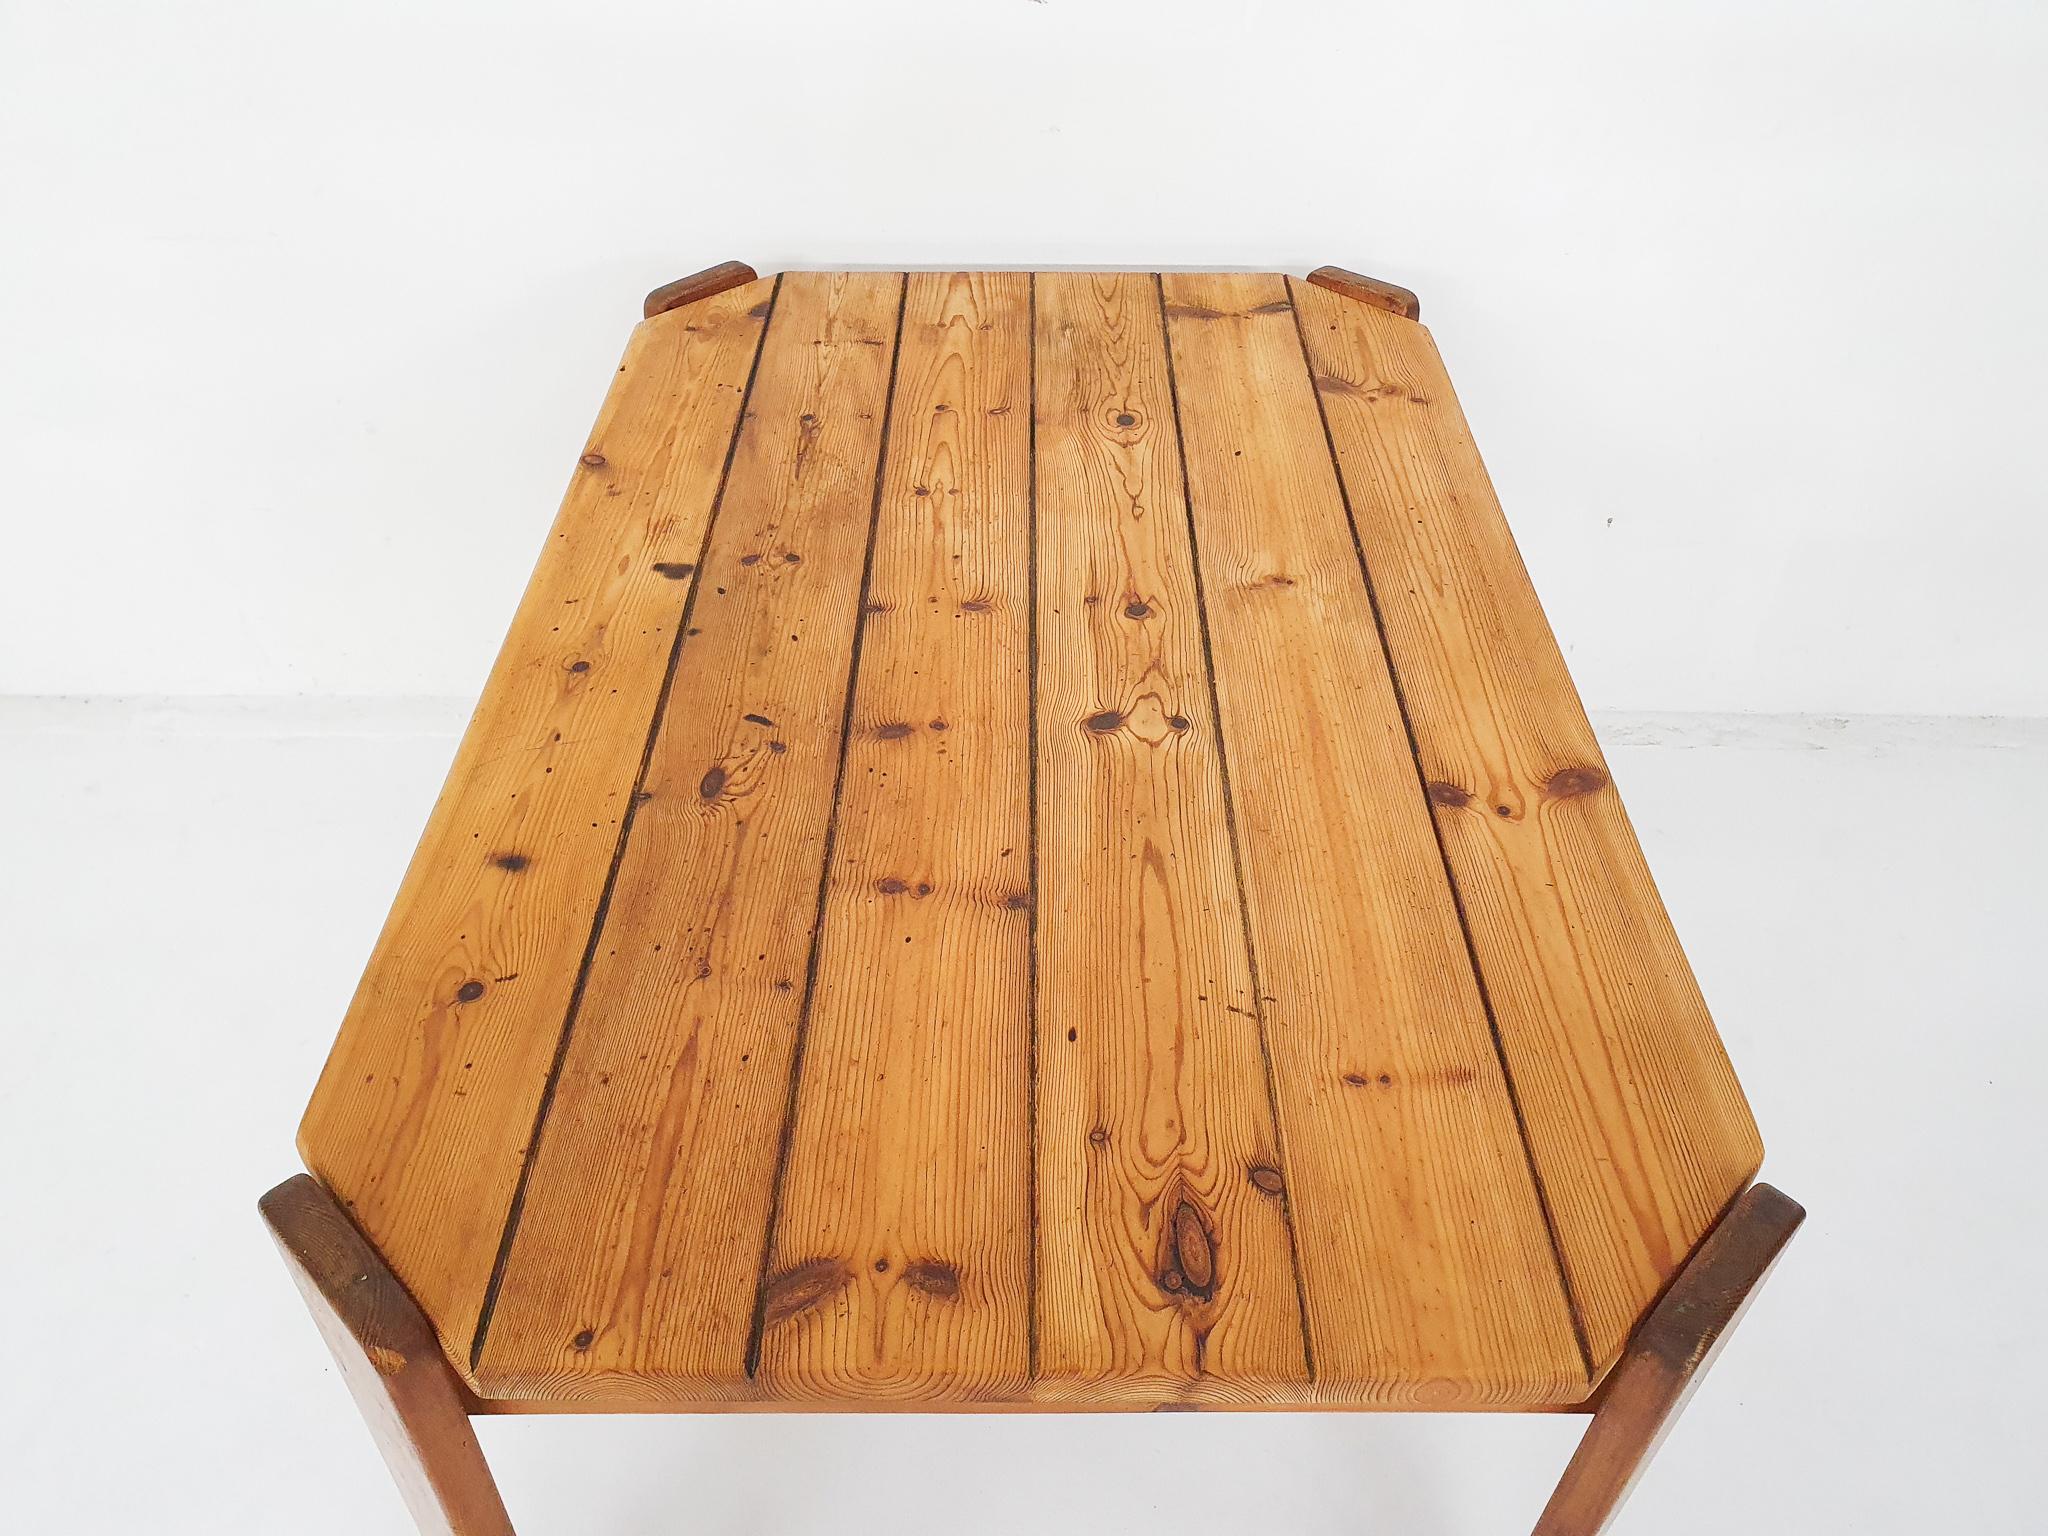 Pinewood dining table attrb. to Ate van Apeldoorn, The Netherlands 1970's For Sale 1